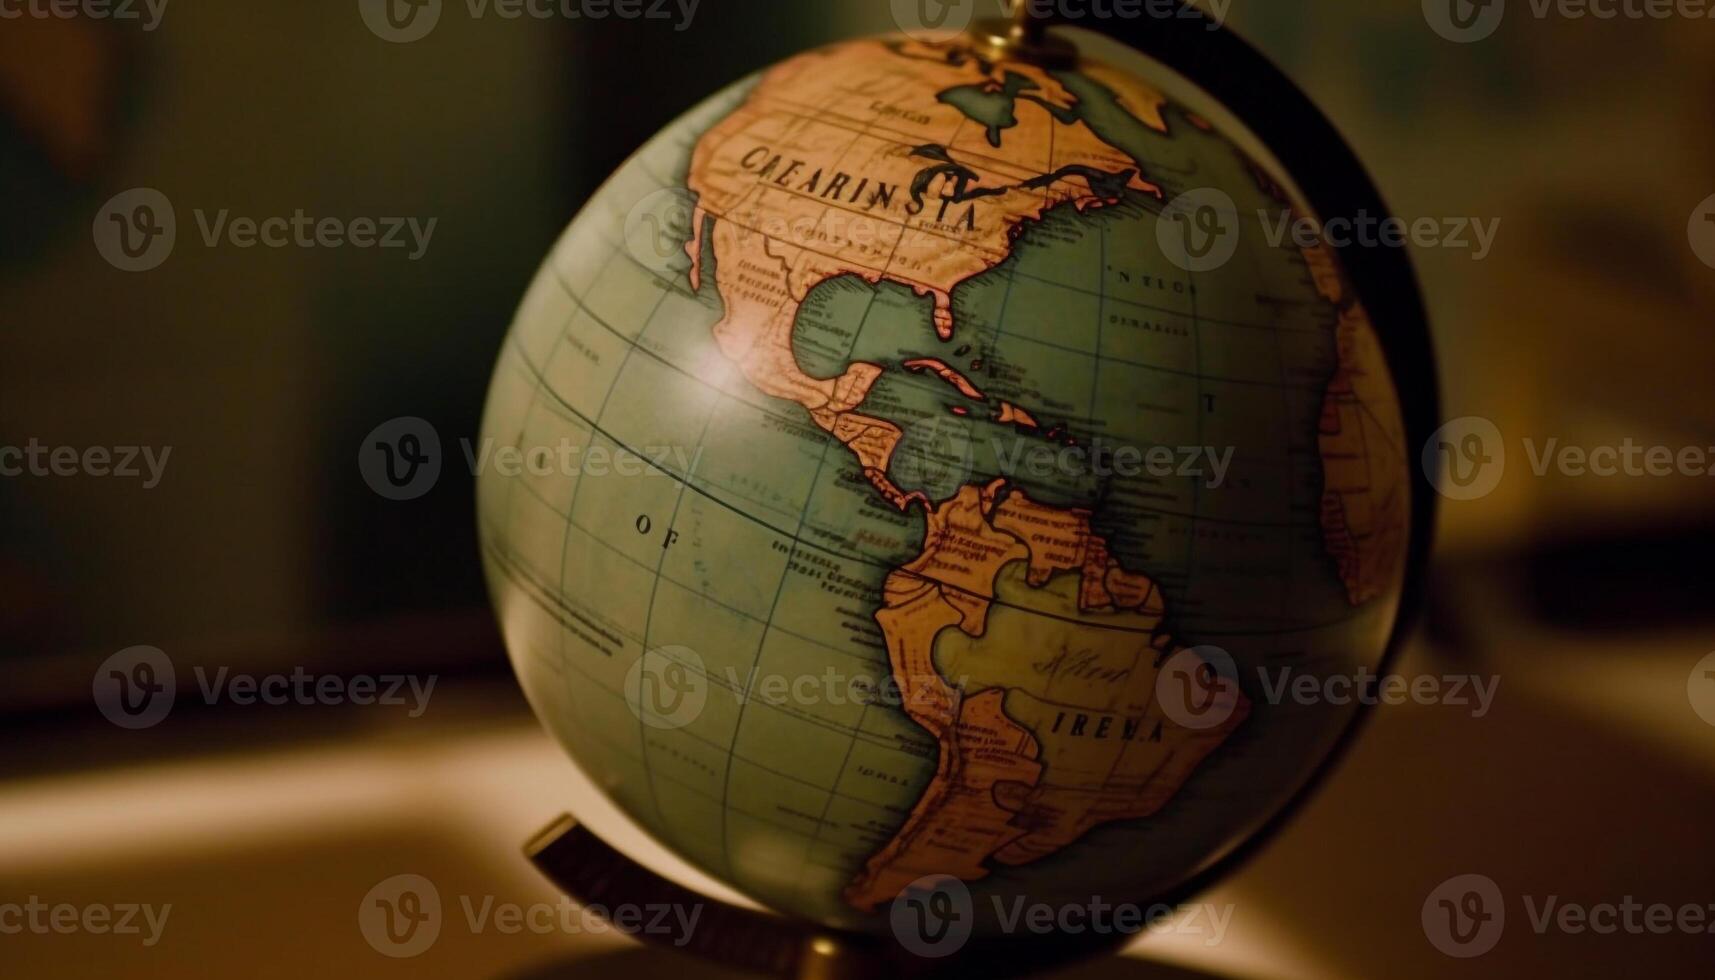 Explore the world topography with an antique globe map generated by AI photo